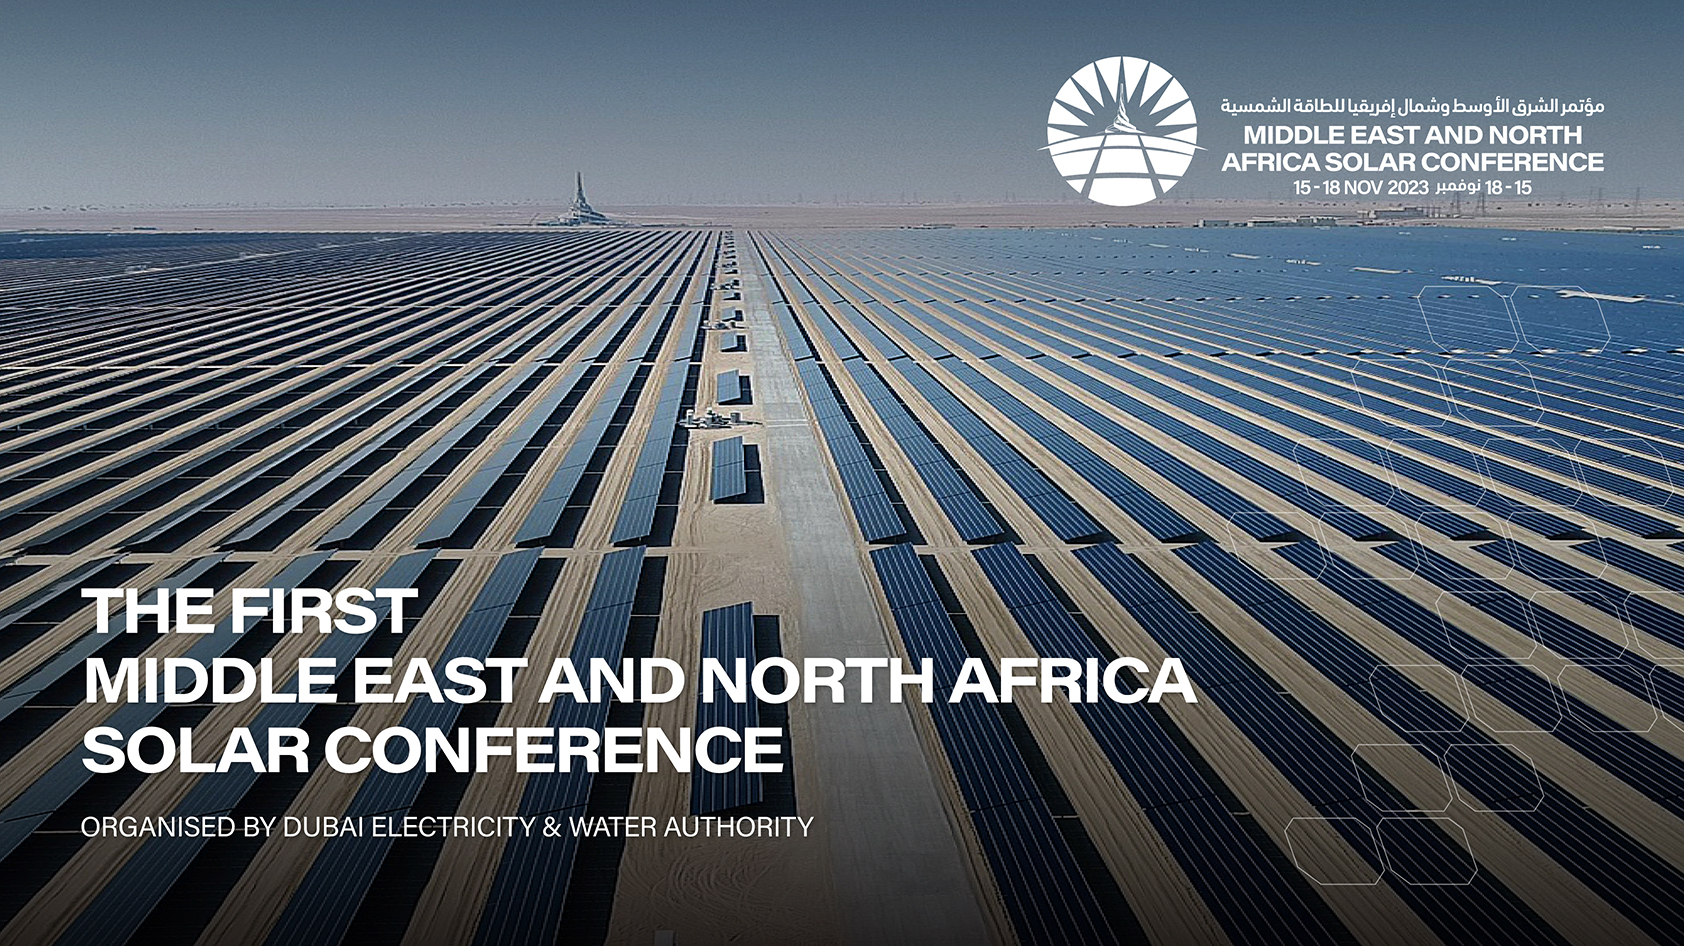 MENA-SC (Middle East and North Africa Solar Conference)